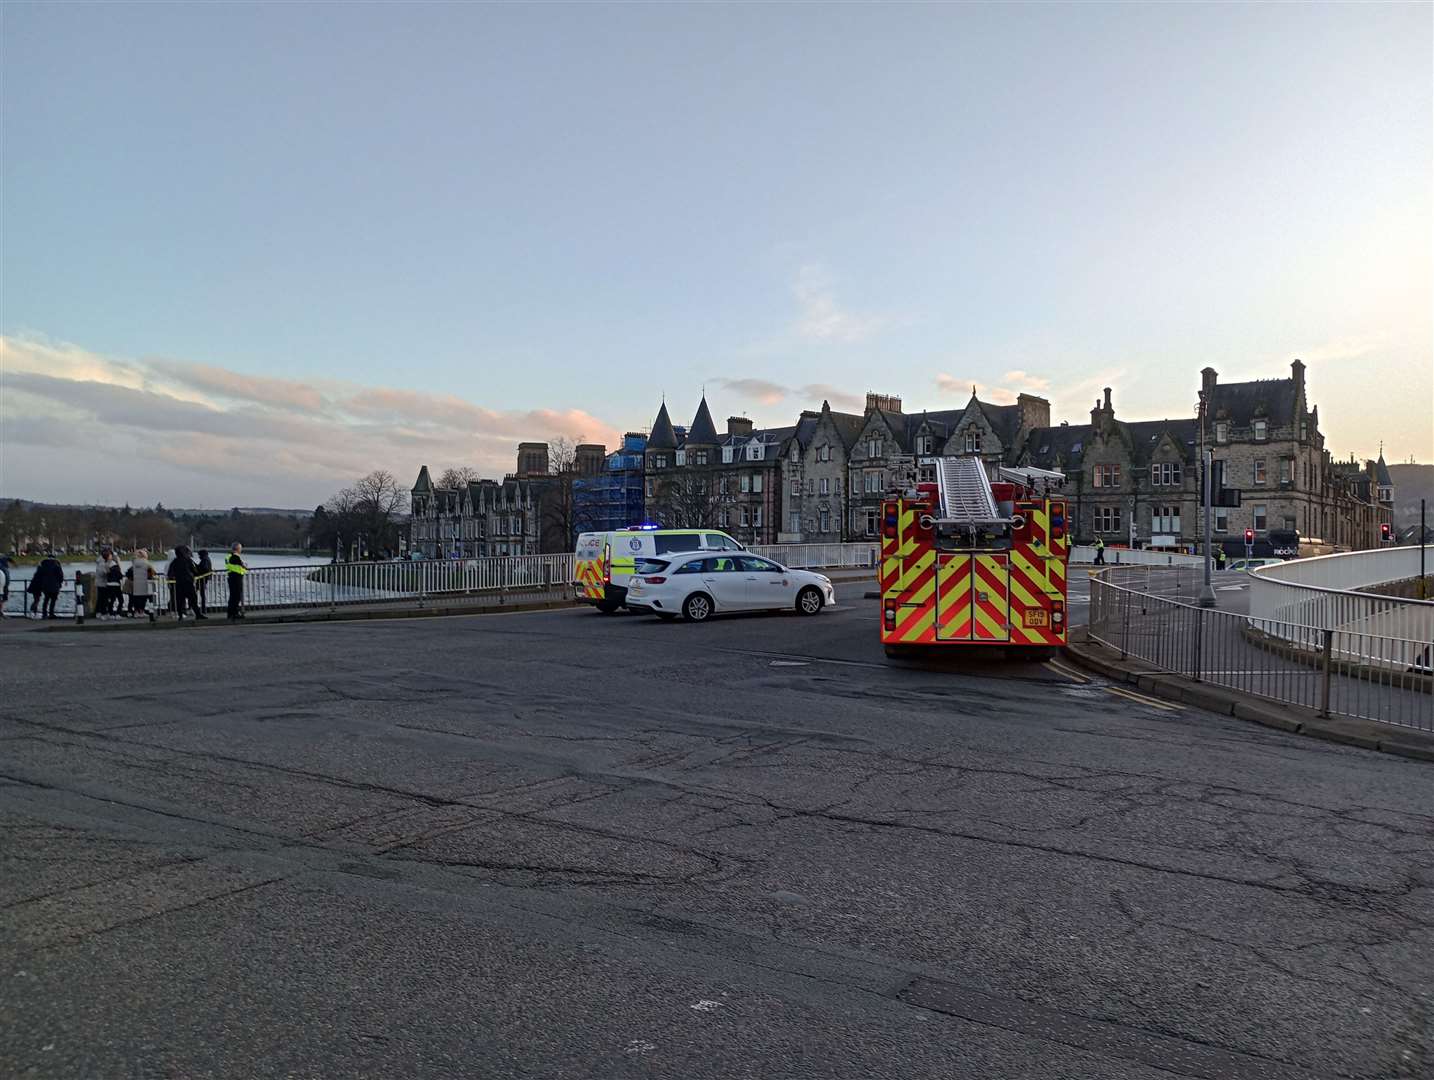 An incident is currently ongoing at Ness Bridge.